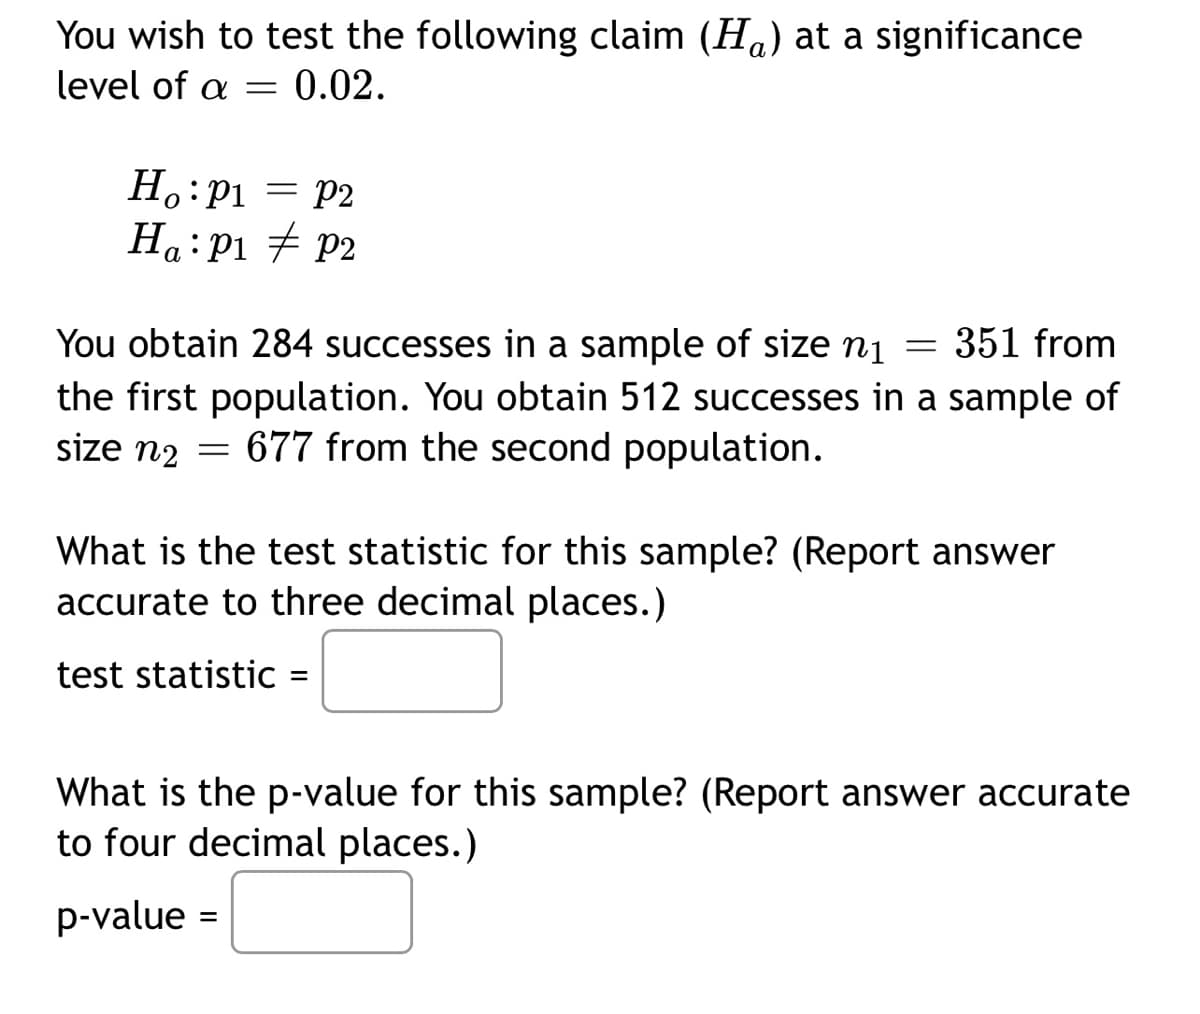 You wish to test the following claim (Ha) at a significance
level of a
0.02.
Ho:P1 = P2
Ha: Pi # p2
You obtain 284 successes in a sample of size n1
351 from
the first population. You obtain 512 successes in a sample of
size n2 = 677 from the second population.
What is the test statistic for this sample? (Report answer
accurate to three decimal places.)
test statistic
What is the p-value for this sample? (Report answer accurate
to four decimal places.)
p-value =
